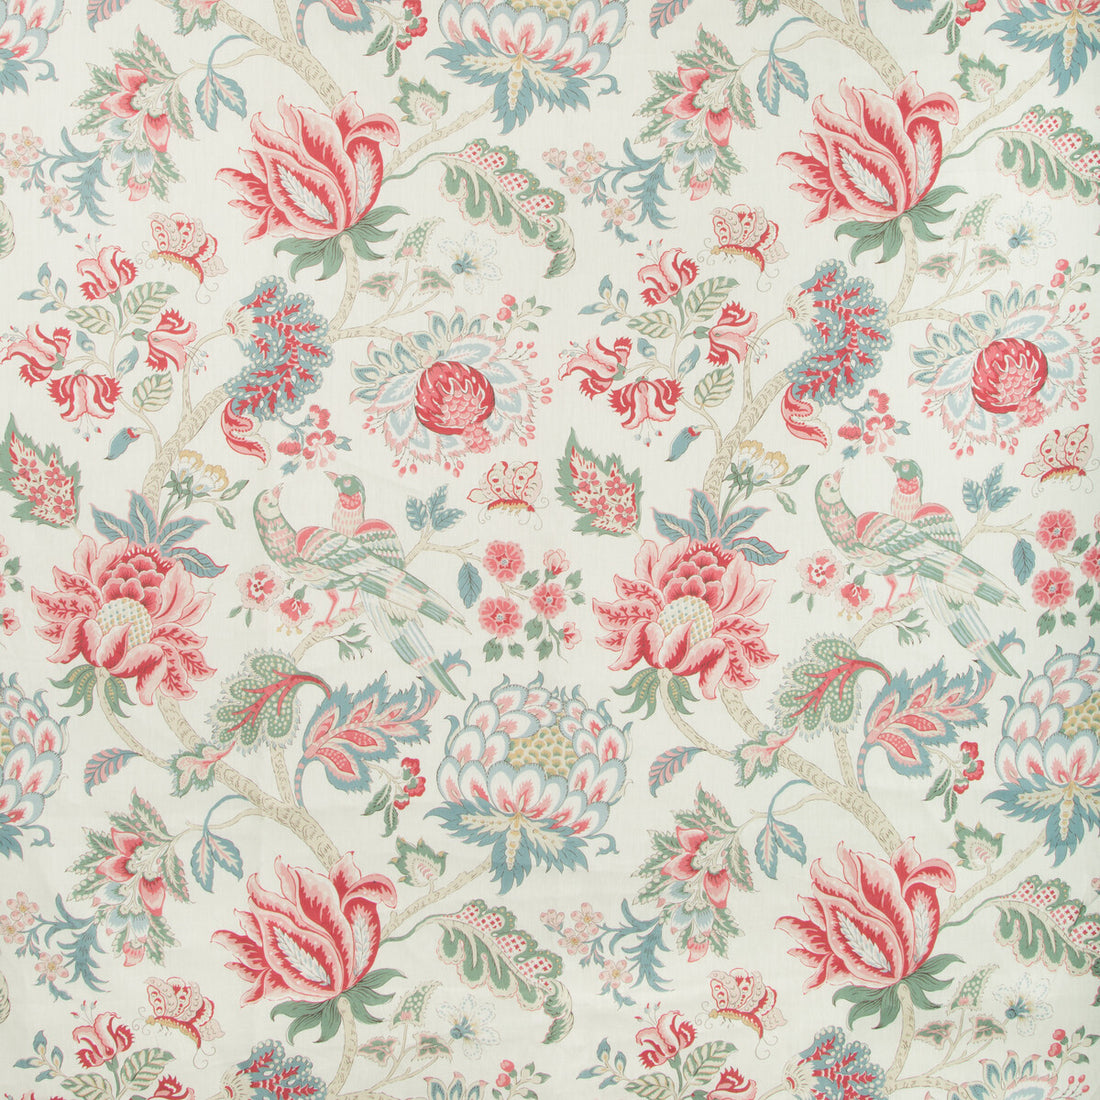 Lambrook fabric in geranium color - pattern LAMBROOK.735.0 - by Kravet Basics in the Greenwich collection